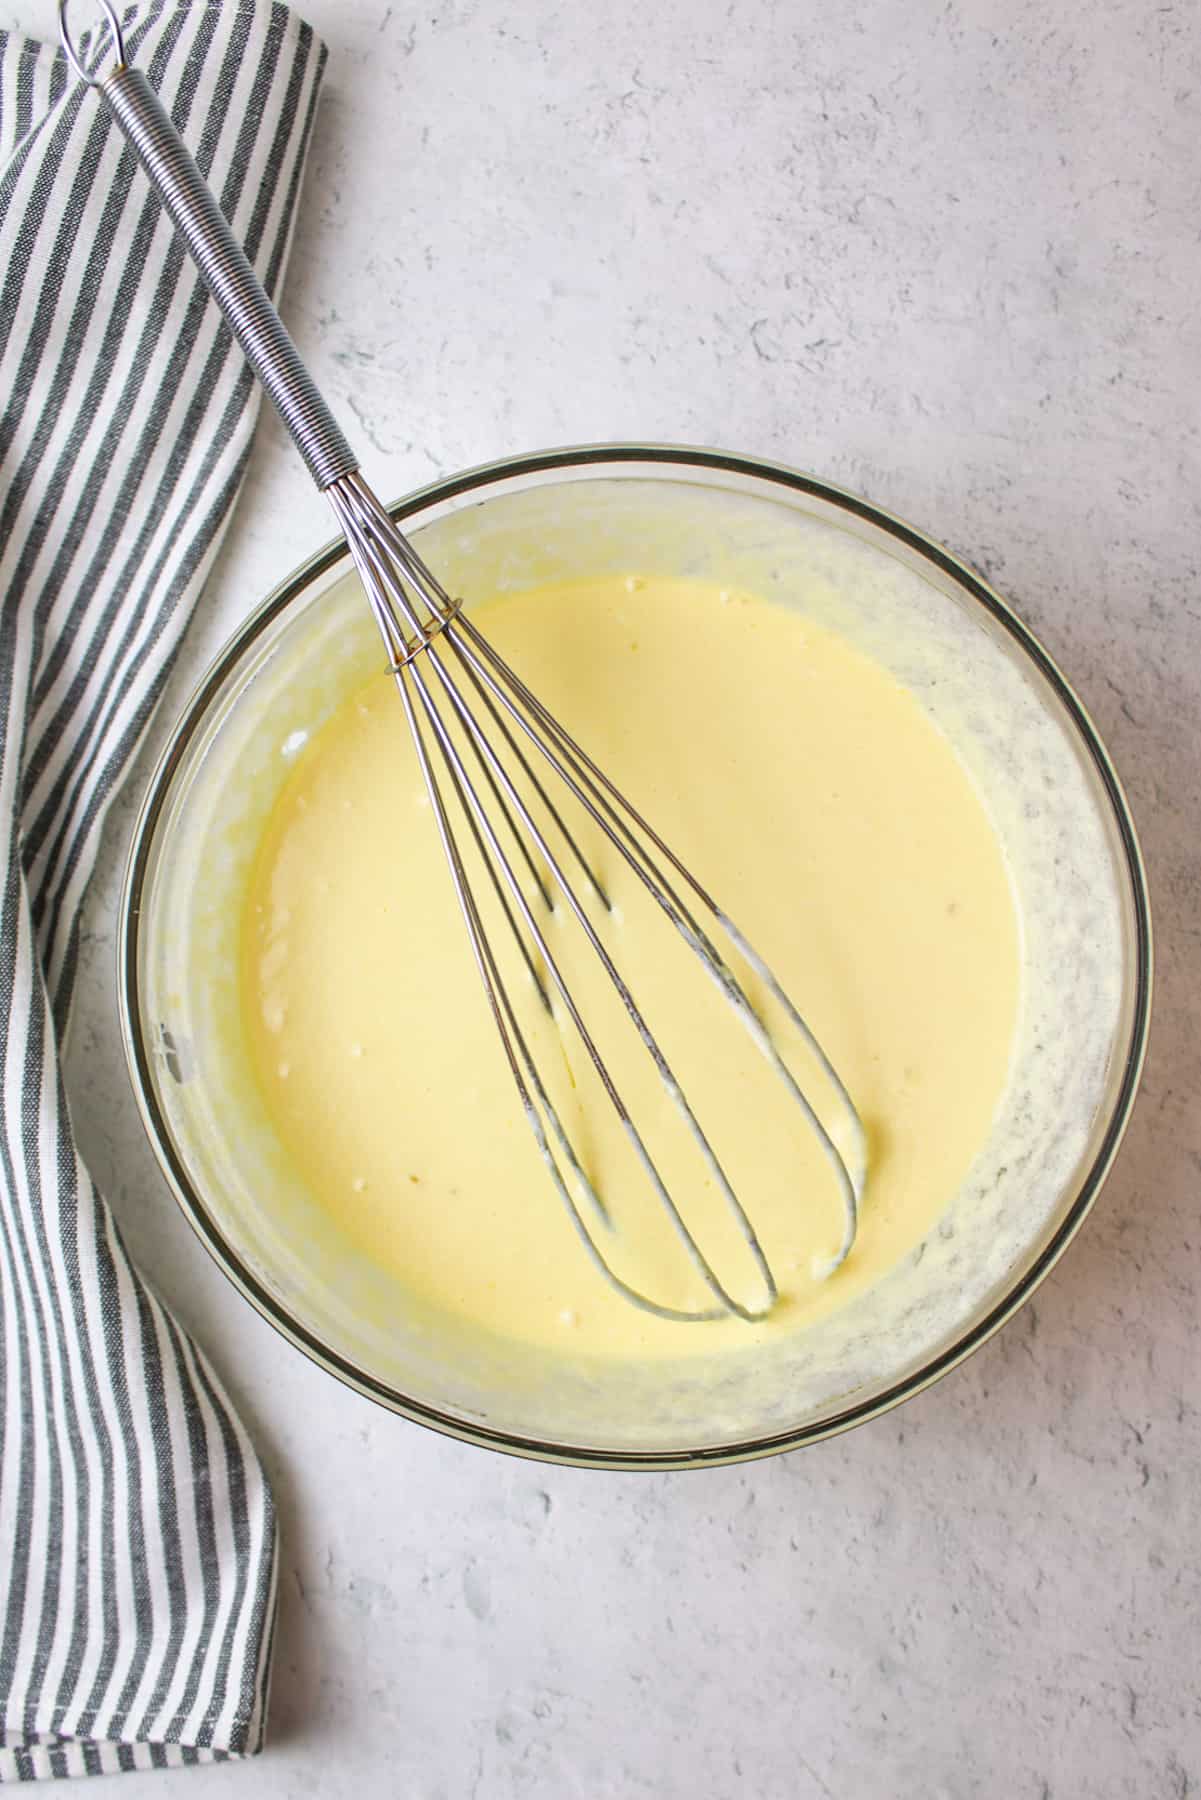 combined wet ingredients in a mixing bowl with a whisk.